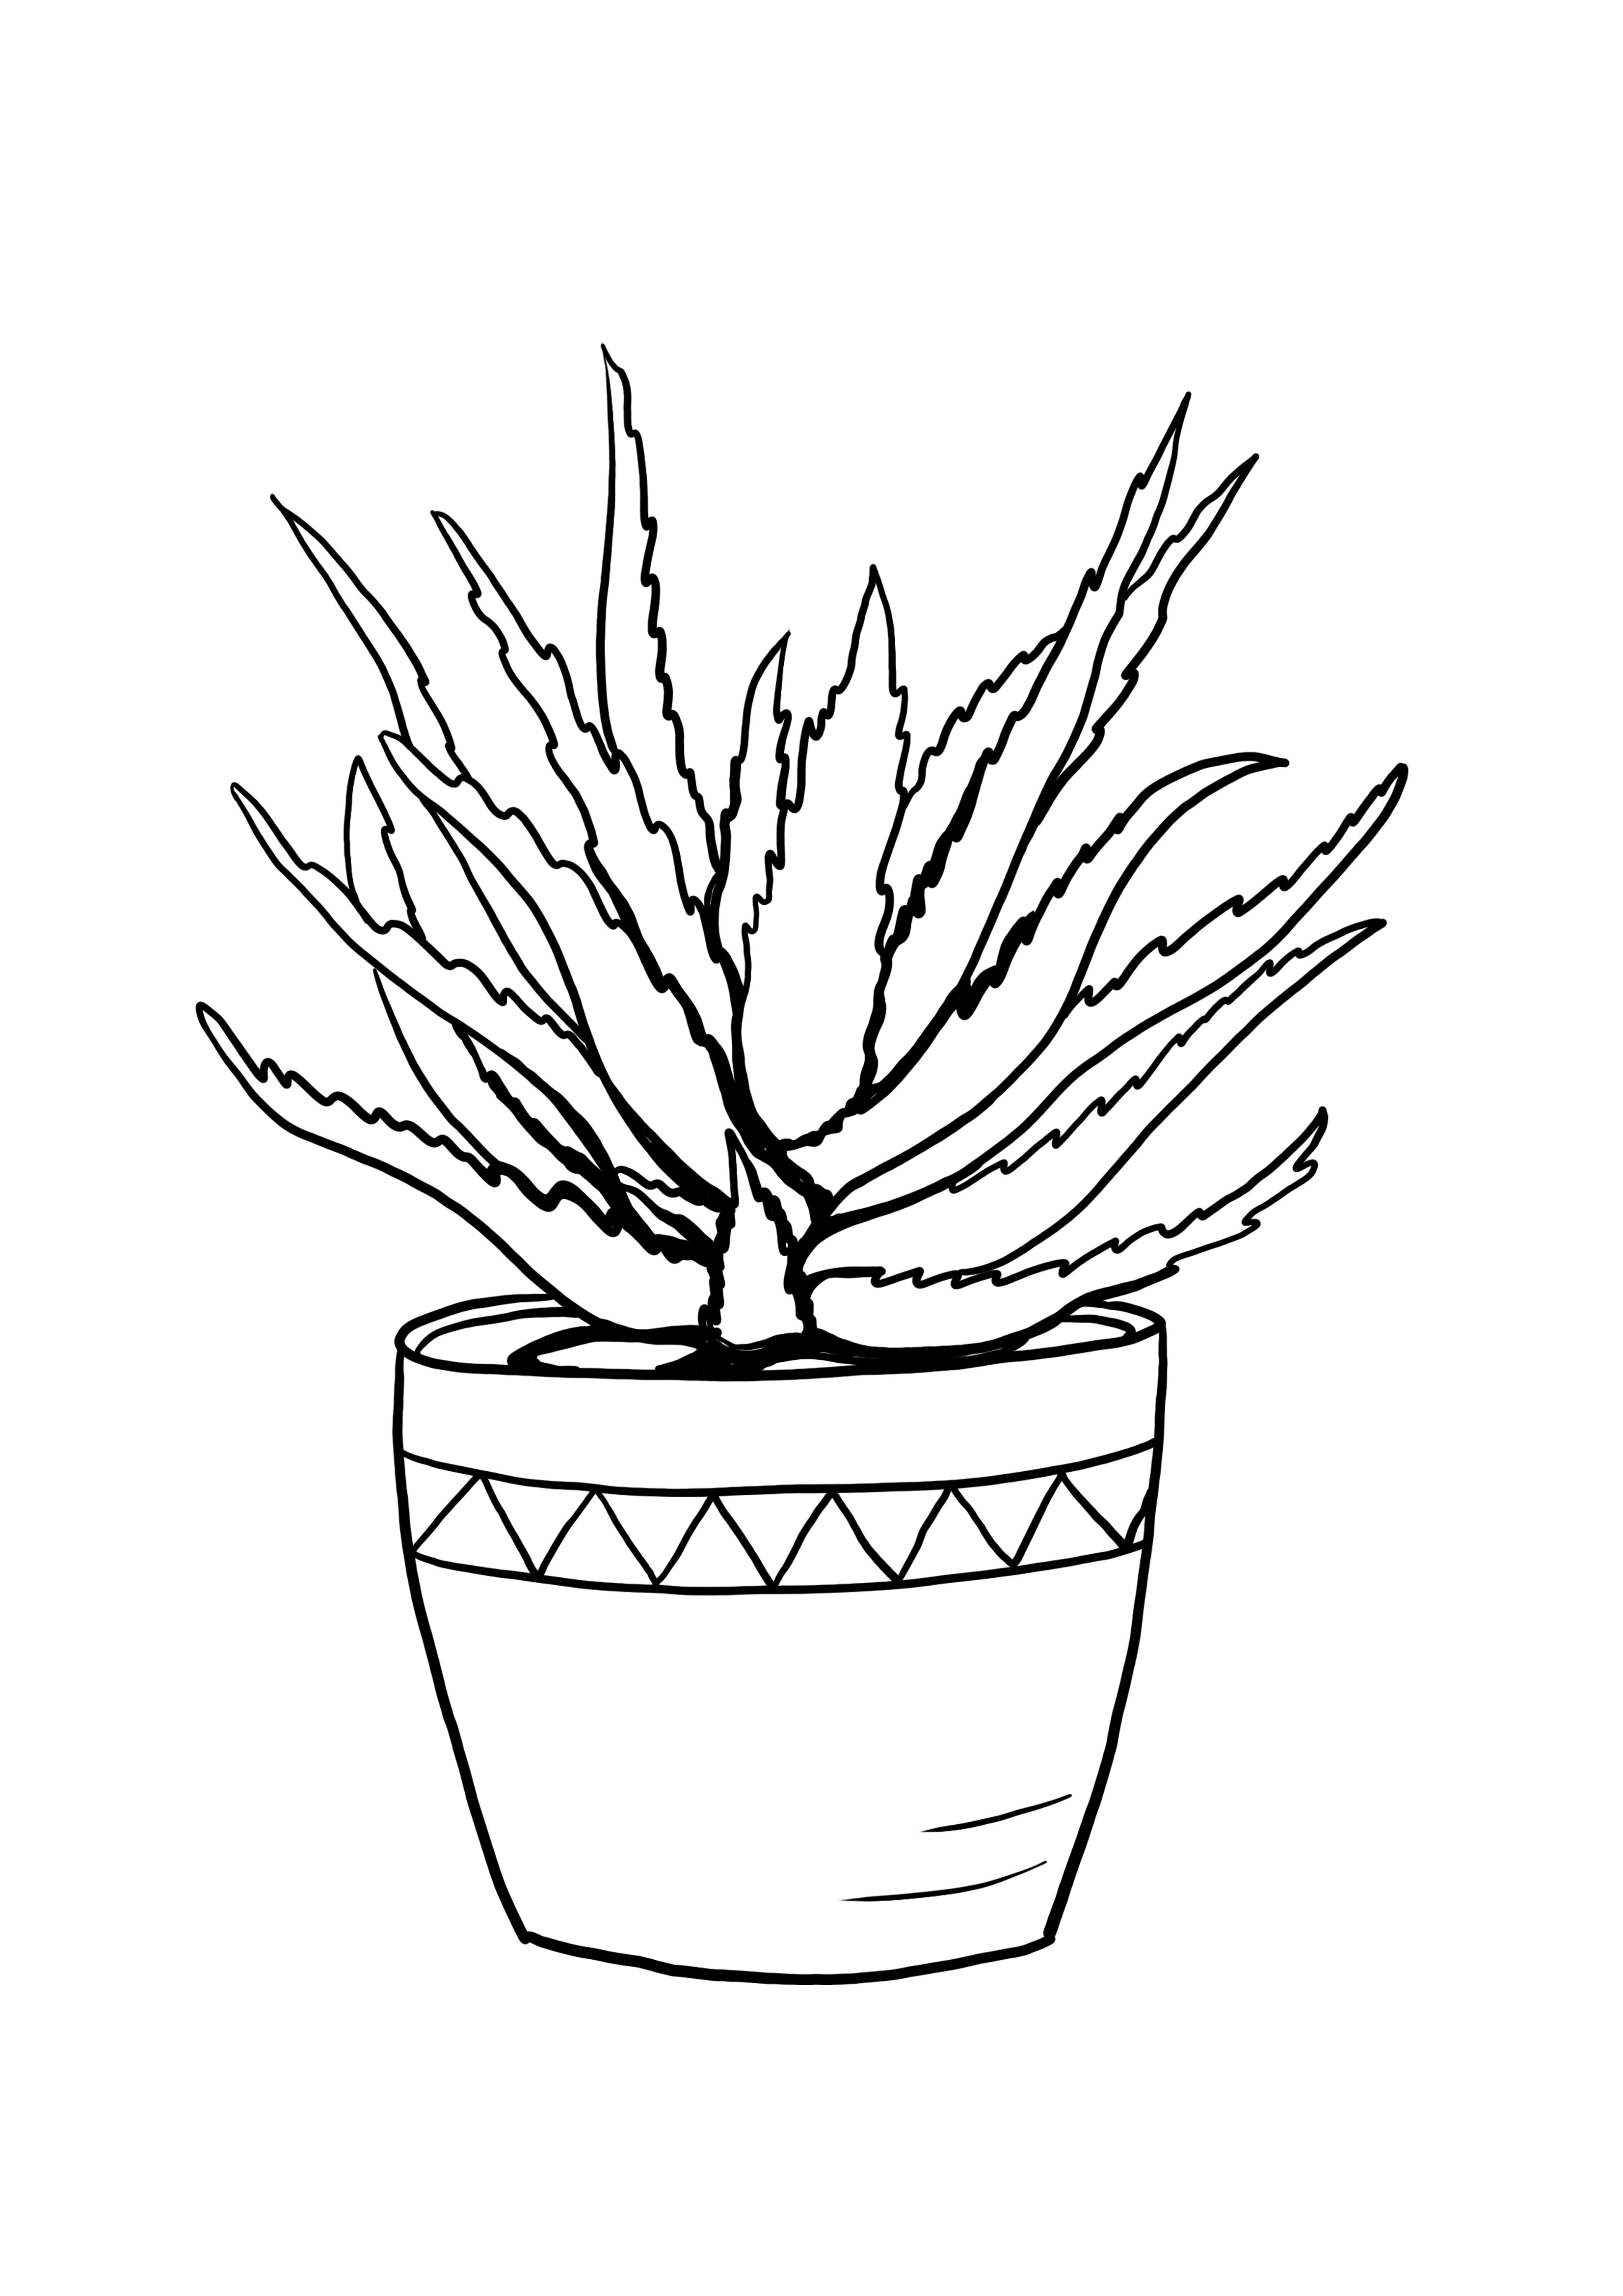 aloe plant easy and free printing and coloring image